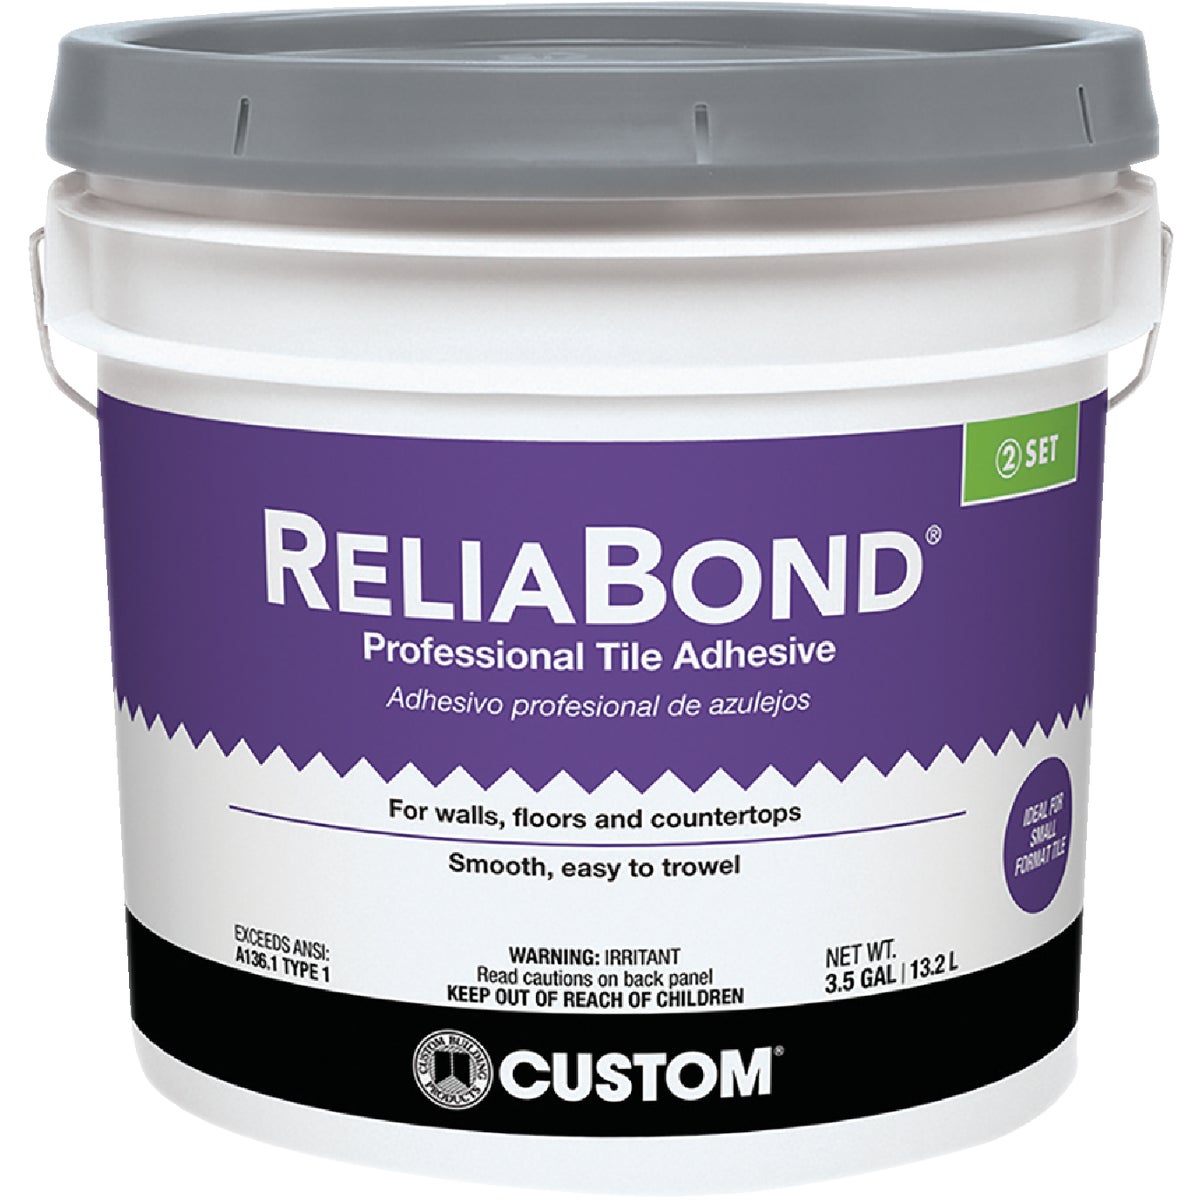 Item 270377, Reliabond extended set all-purpose professional adhesive formulated for 